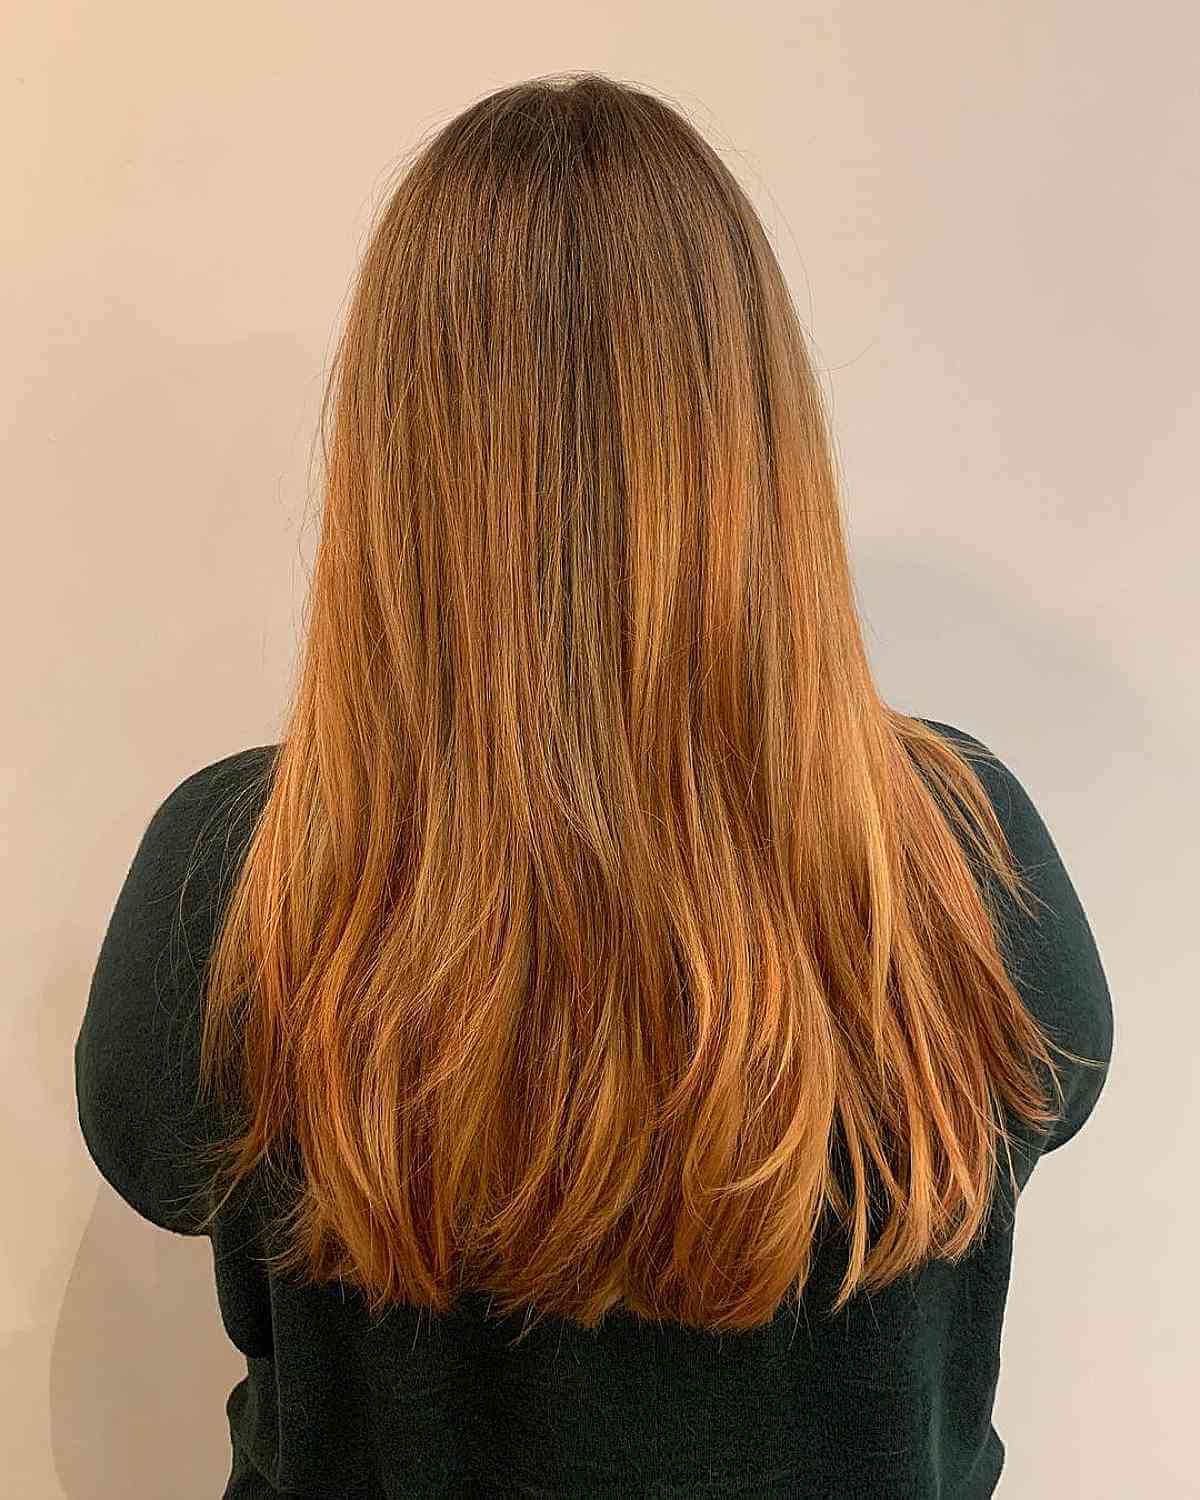 16 Sweetest Strawberry Blonde Balayage Hair Color Ideas